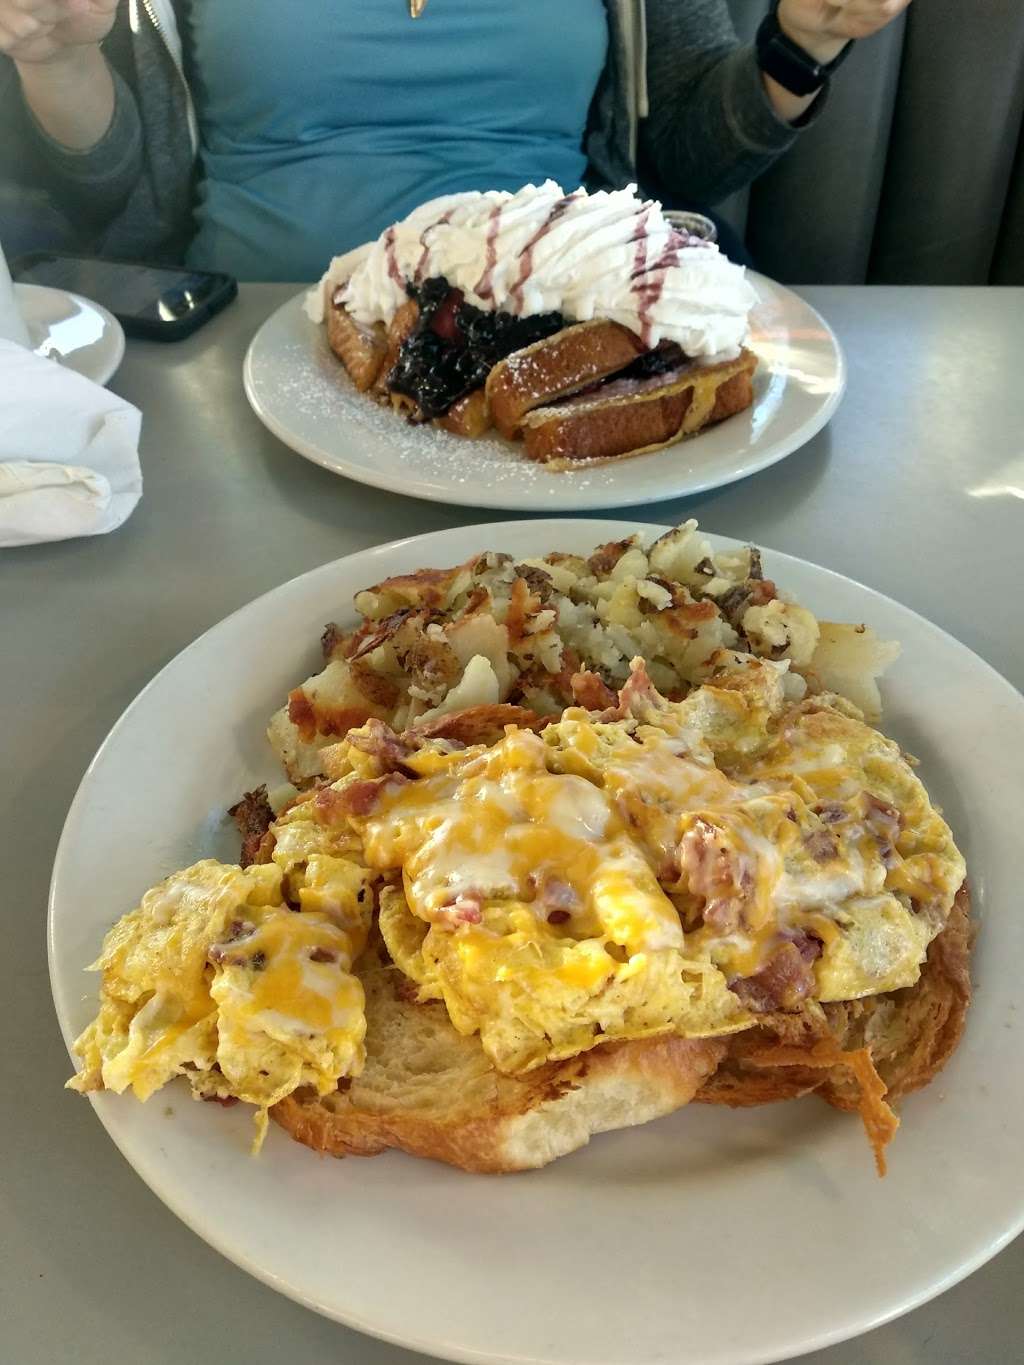 Molly Browns Country Cafe | 13778 Hesperia Rd, Victorville, CA 92395 | Phone: (760) 955-9778